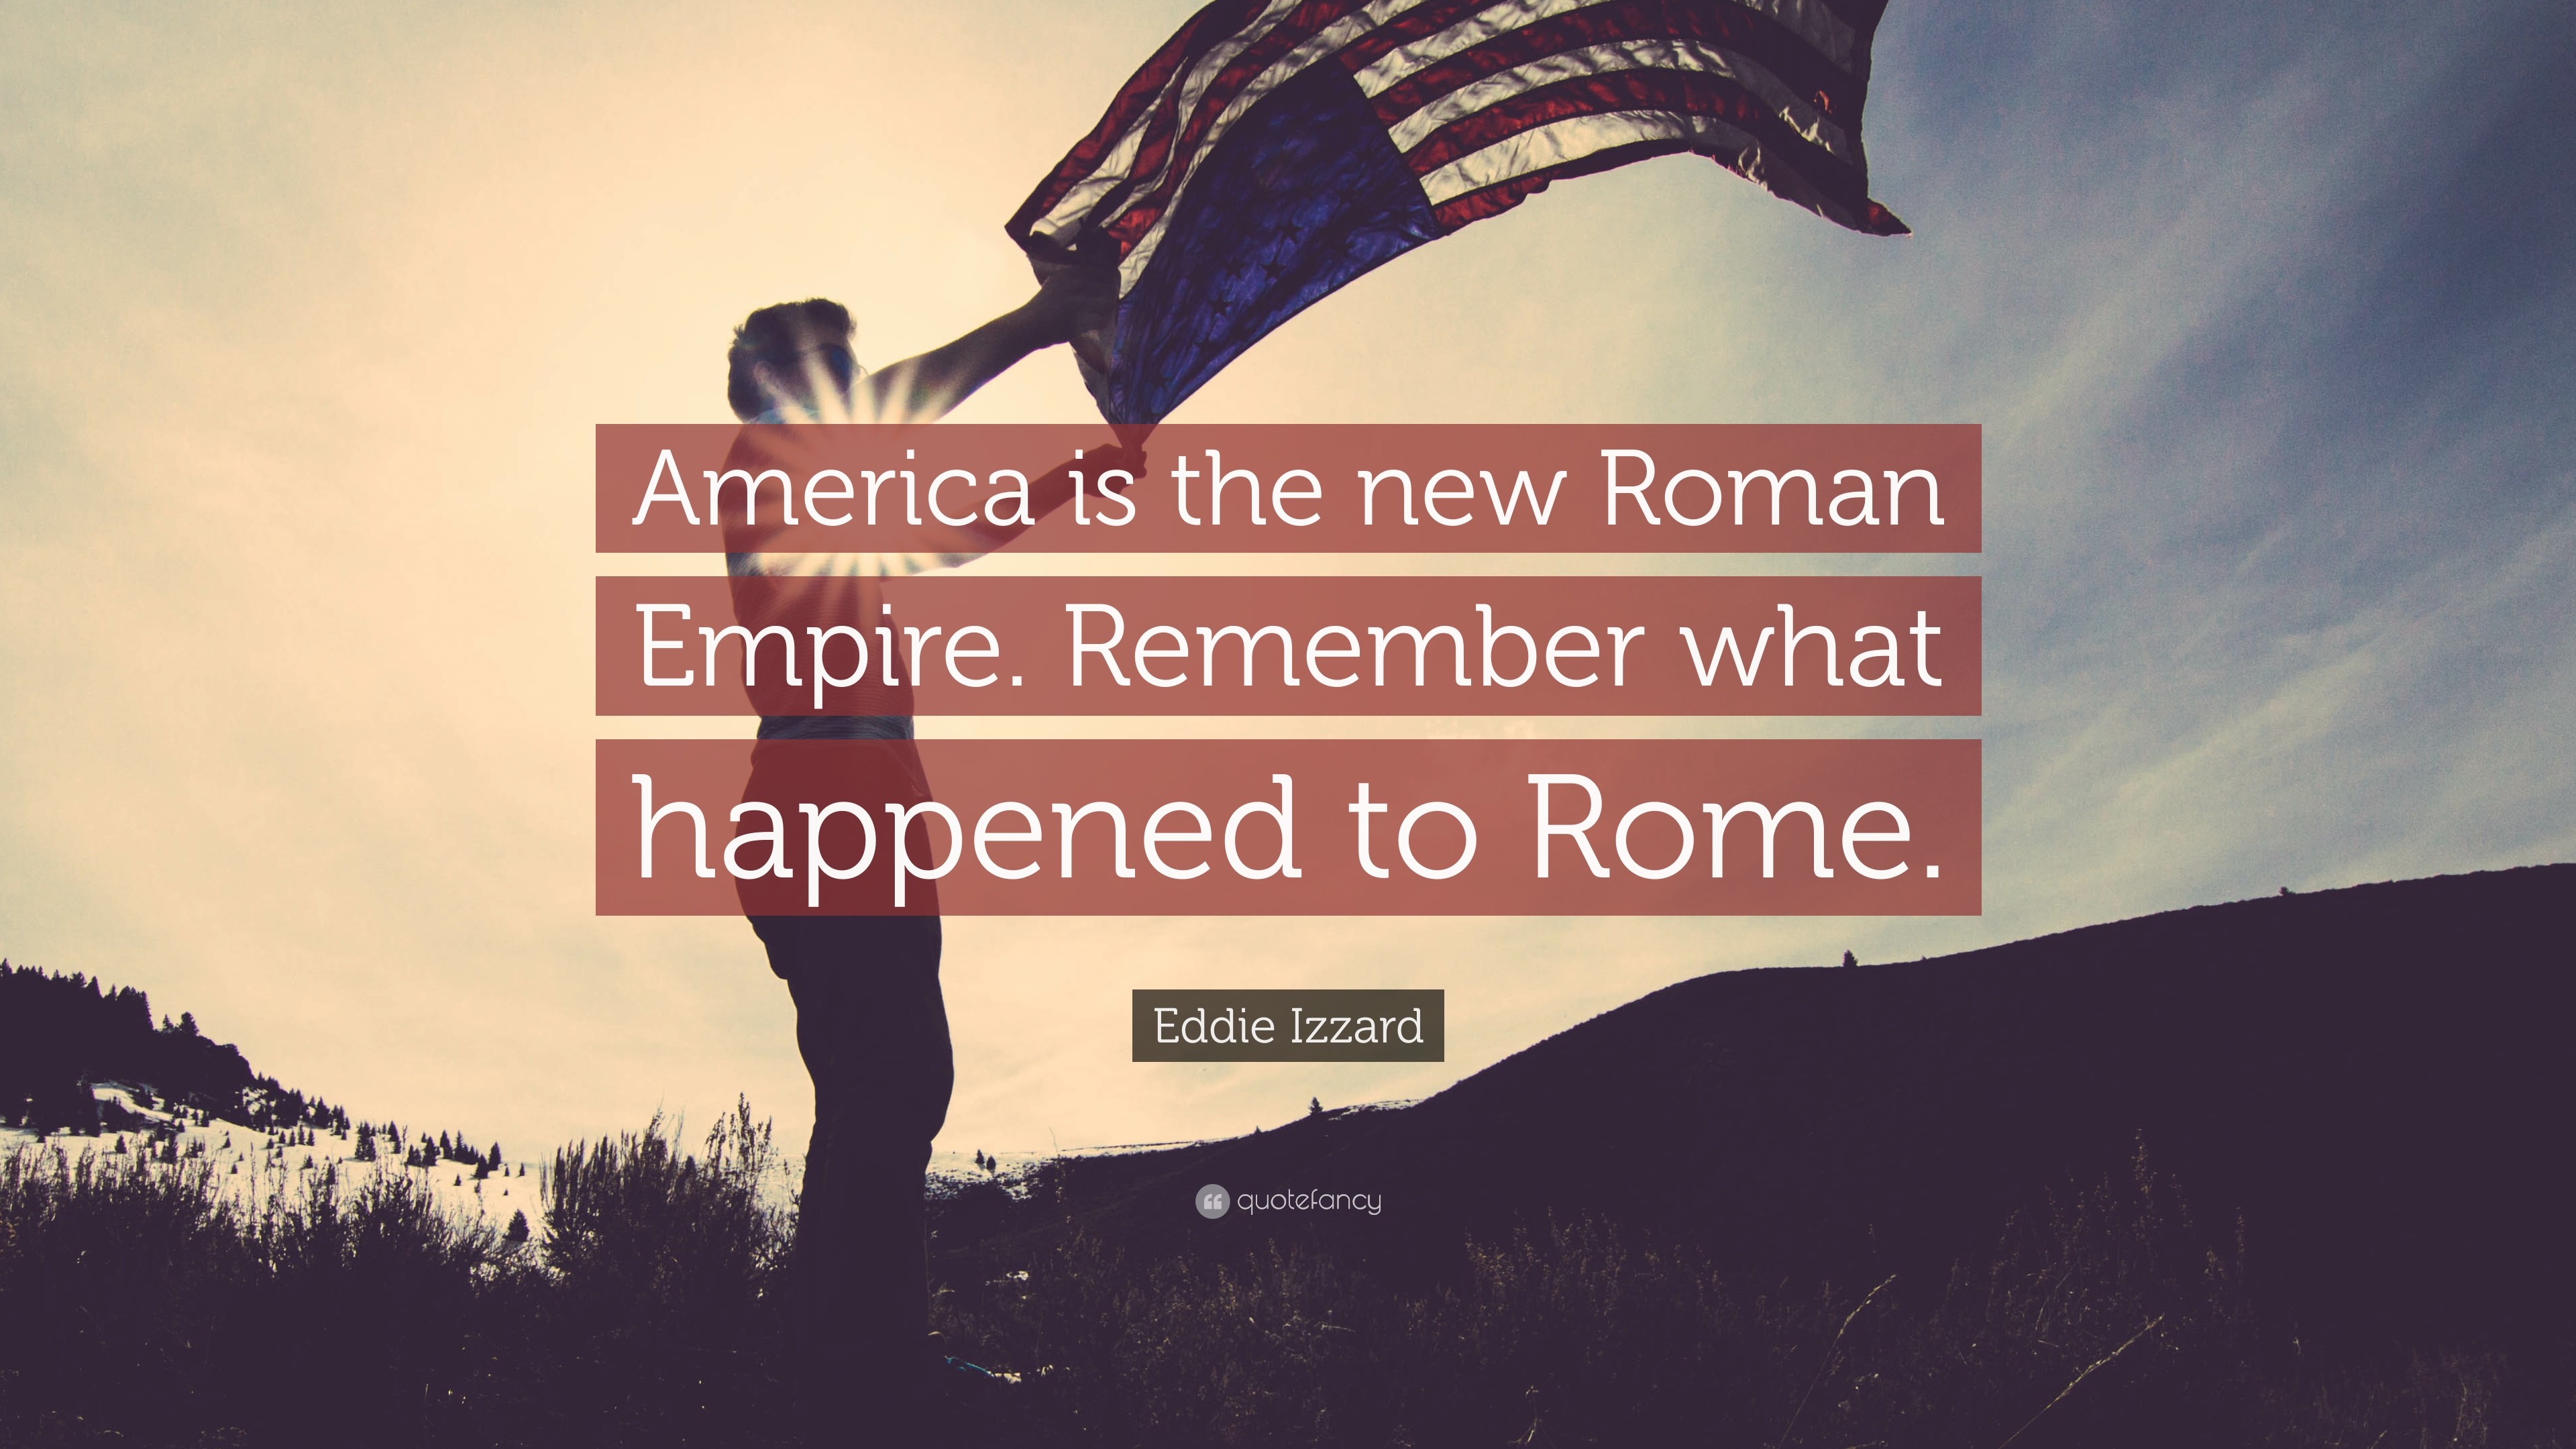 3840x2160 Eddie Izzard Quote: “America is the new Roman Empire. Remember what  happened to